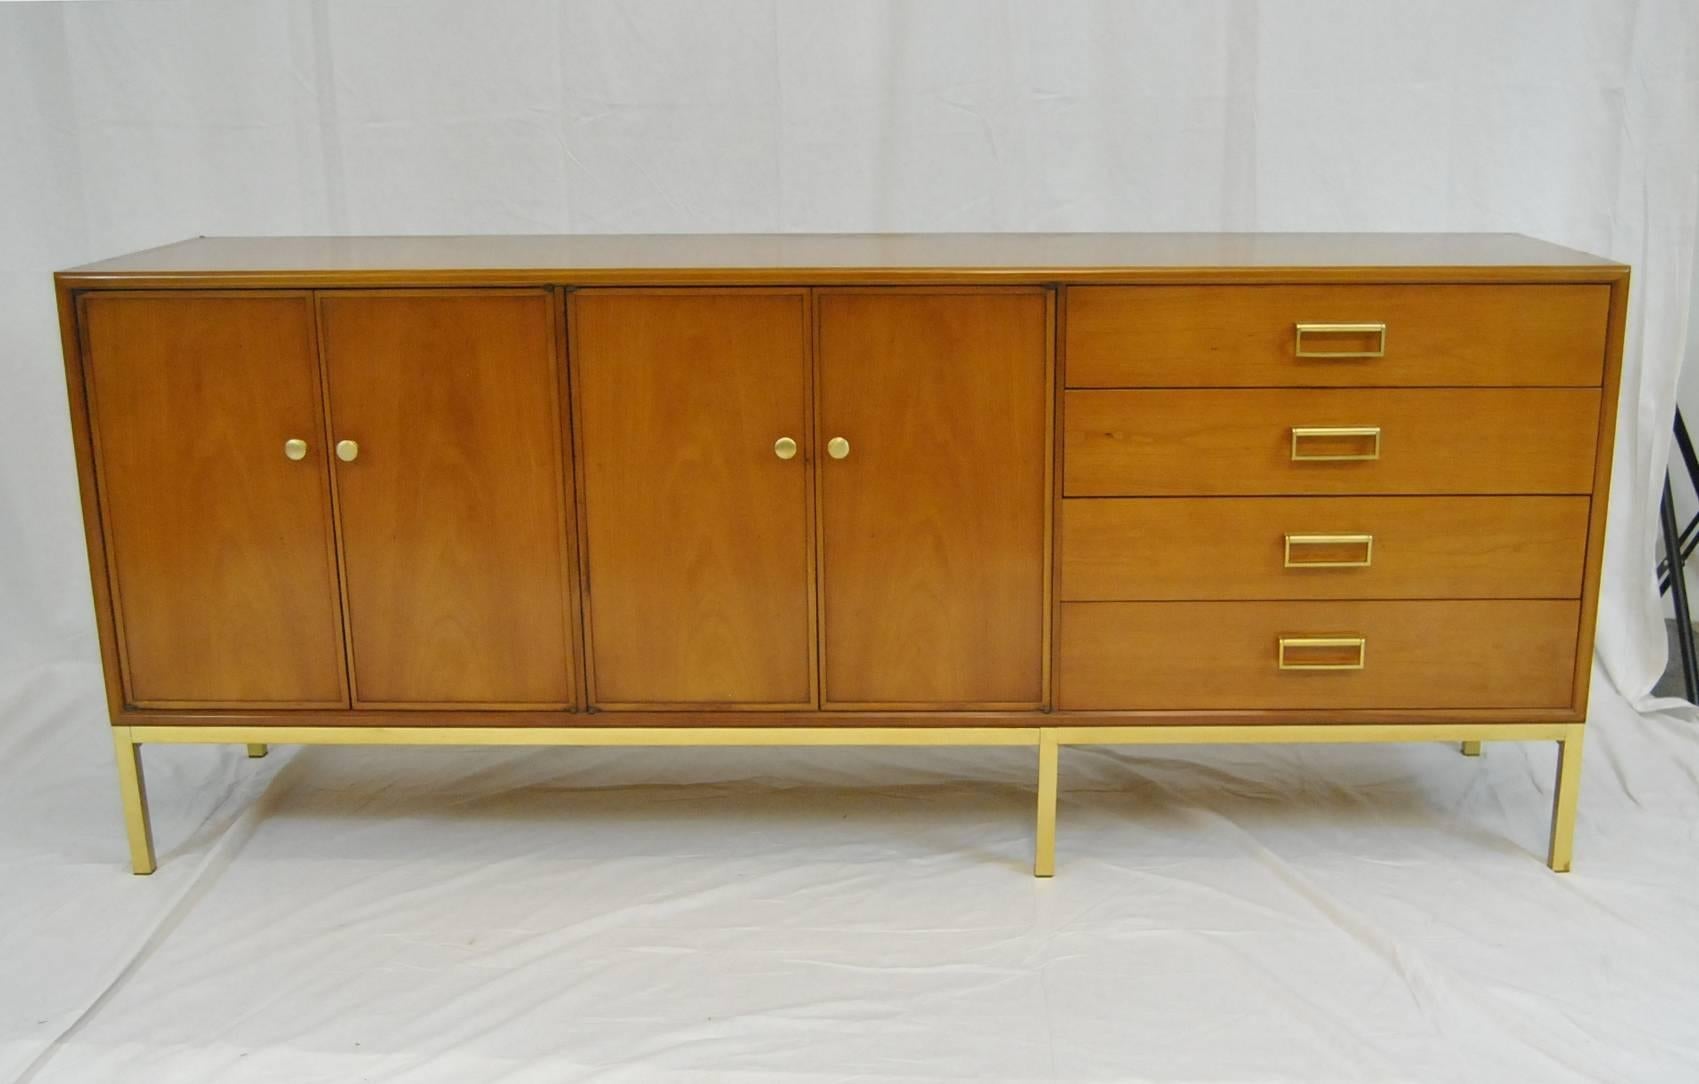 A great Mid-Century credenza by Kipp Stewart for Drexel as part of their Sun Coast collection.  The credenza is done in cherry with four doors and four drawers.  Doors open to two storage areas with one adjustable shelf per area.  There are four